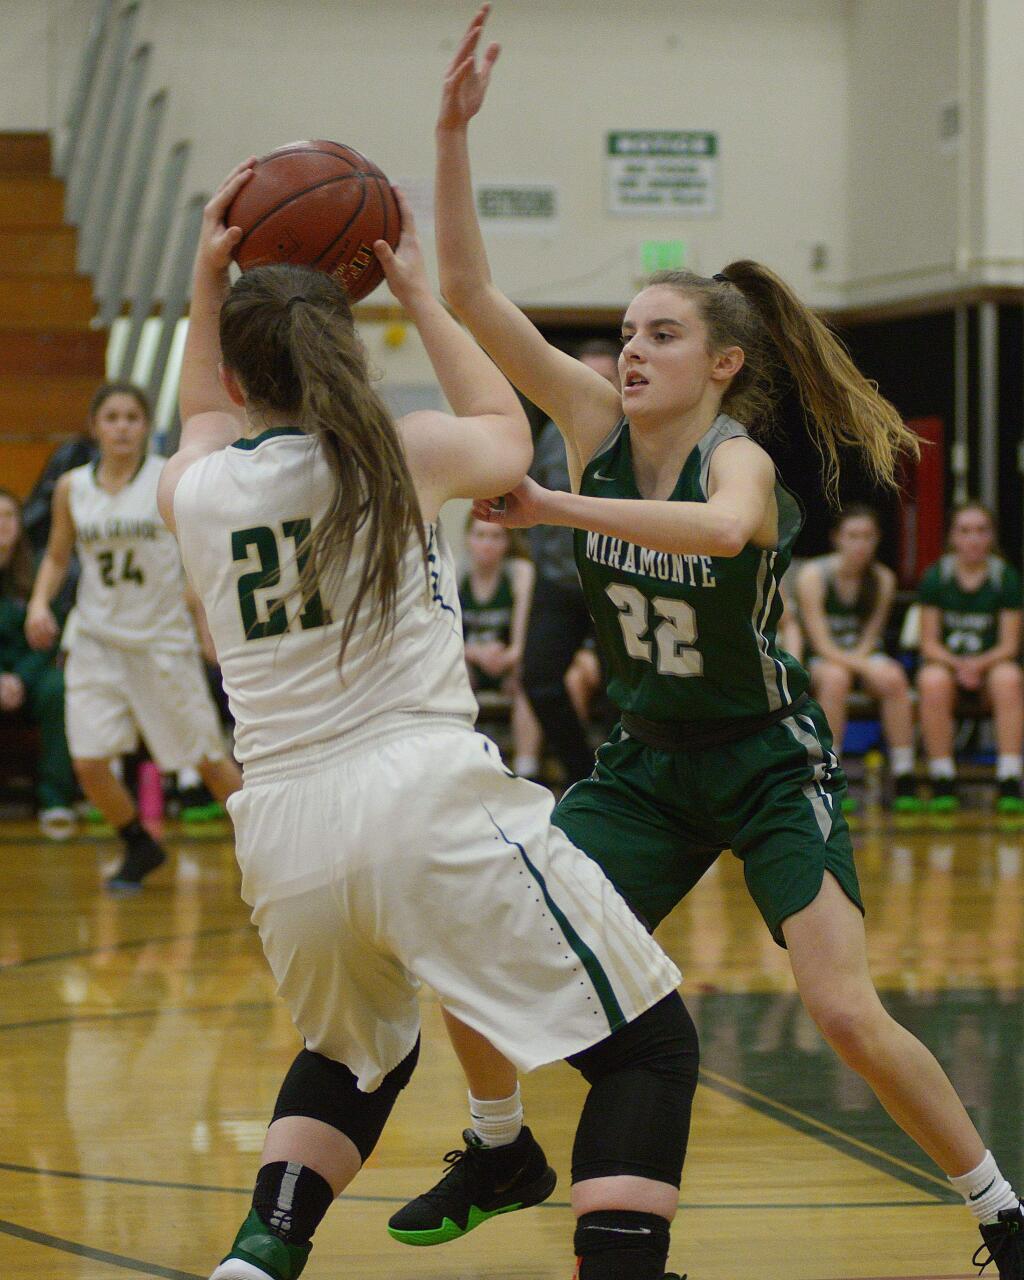 SUMNER FOWLER/FOR THE ARGUS-COURIERMiramonte's Rebecca Welsh is in the face of Casa Grande's Emma Reese as she tries to find an open teammate. Miramonte's defense overwhelmed Casa in a non-league game.